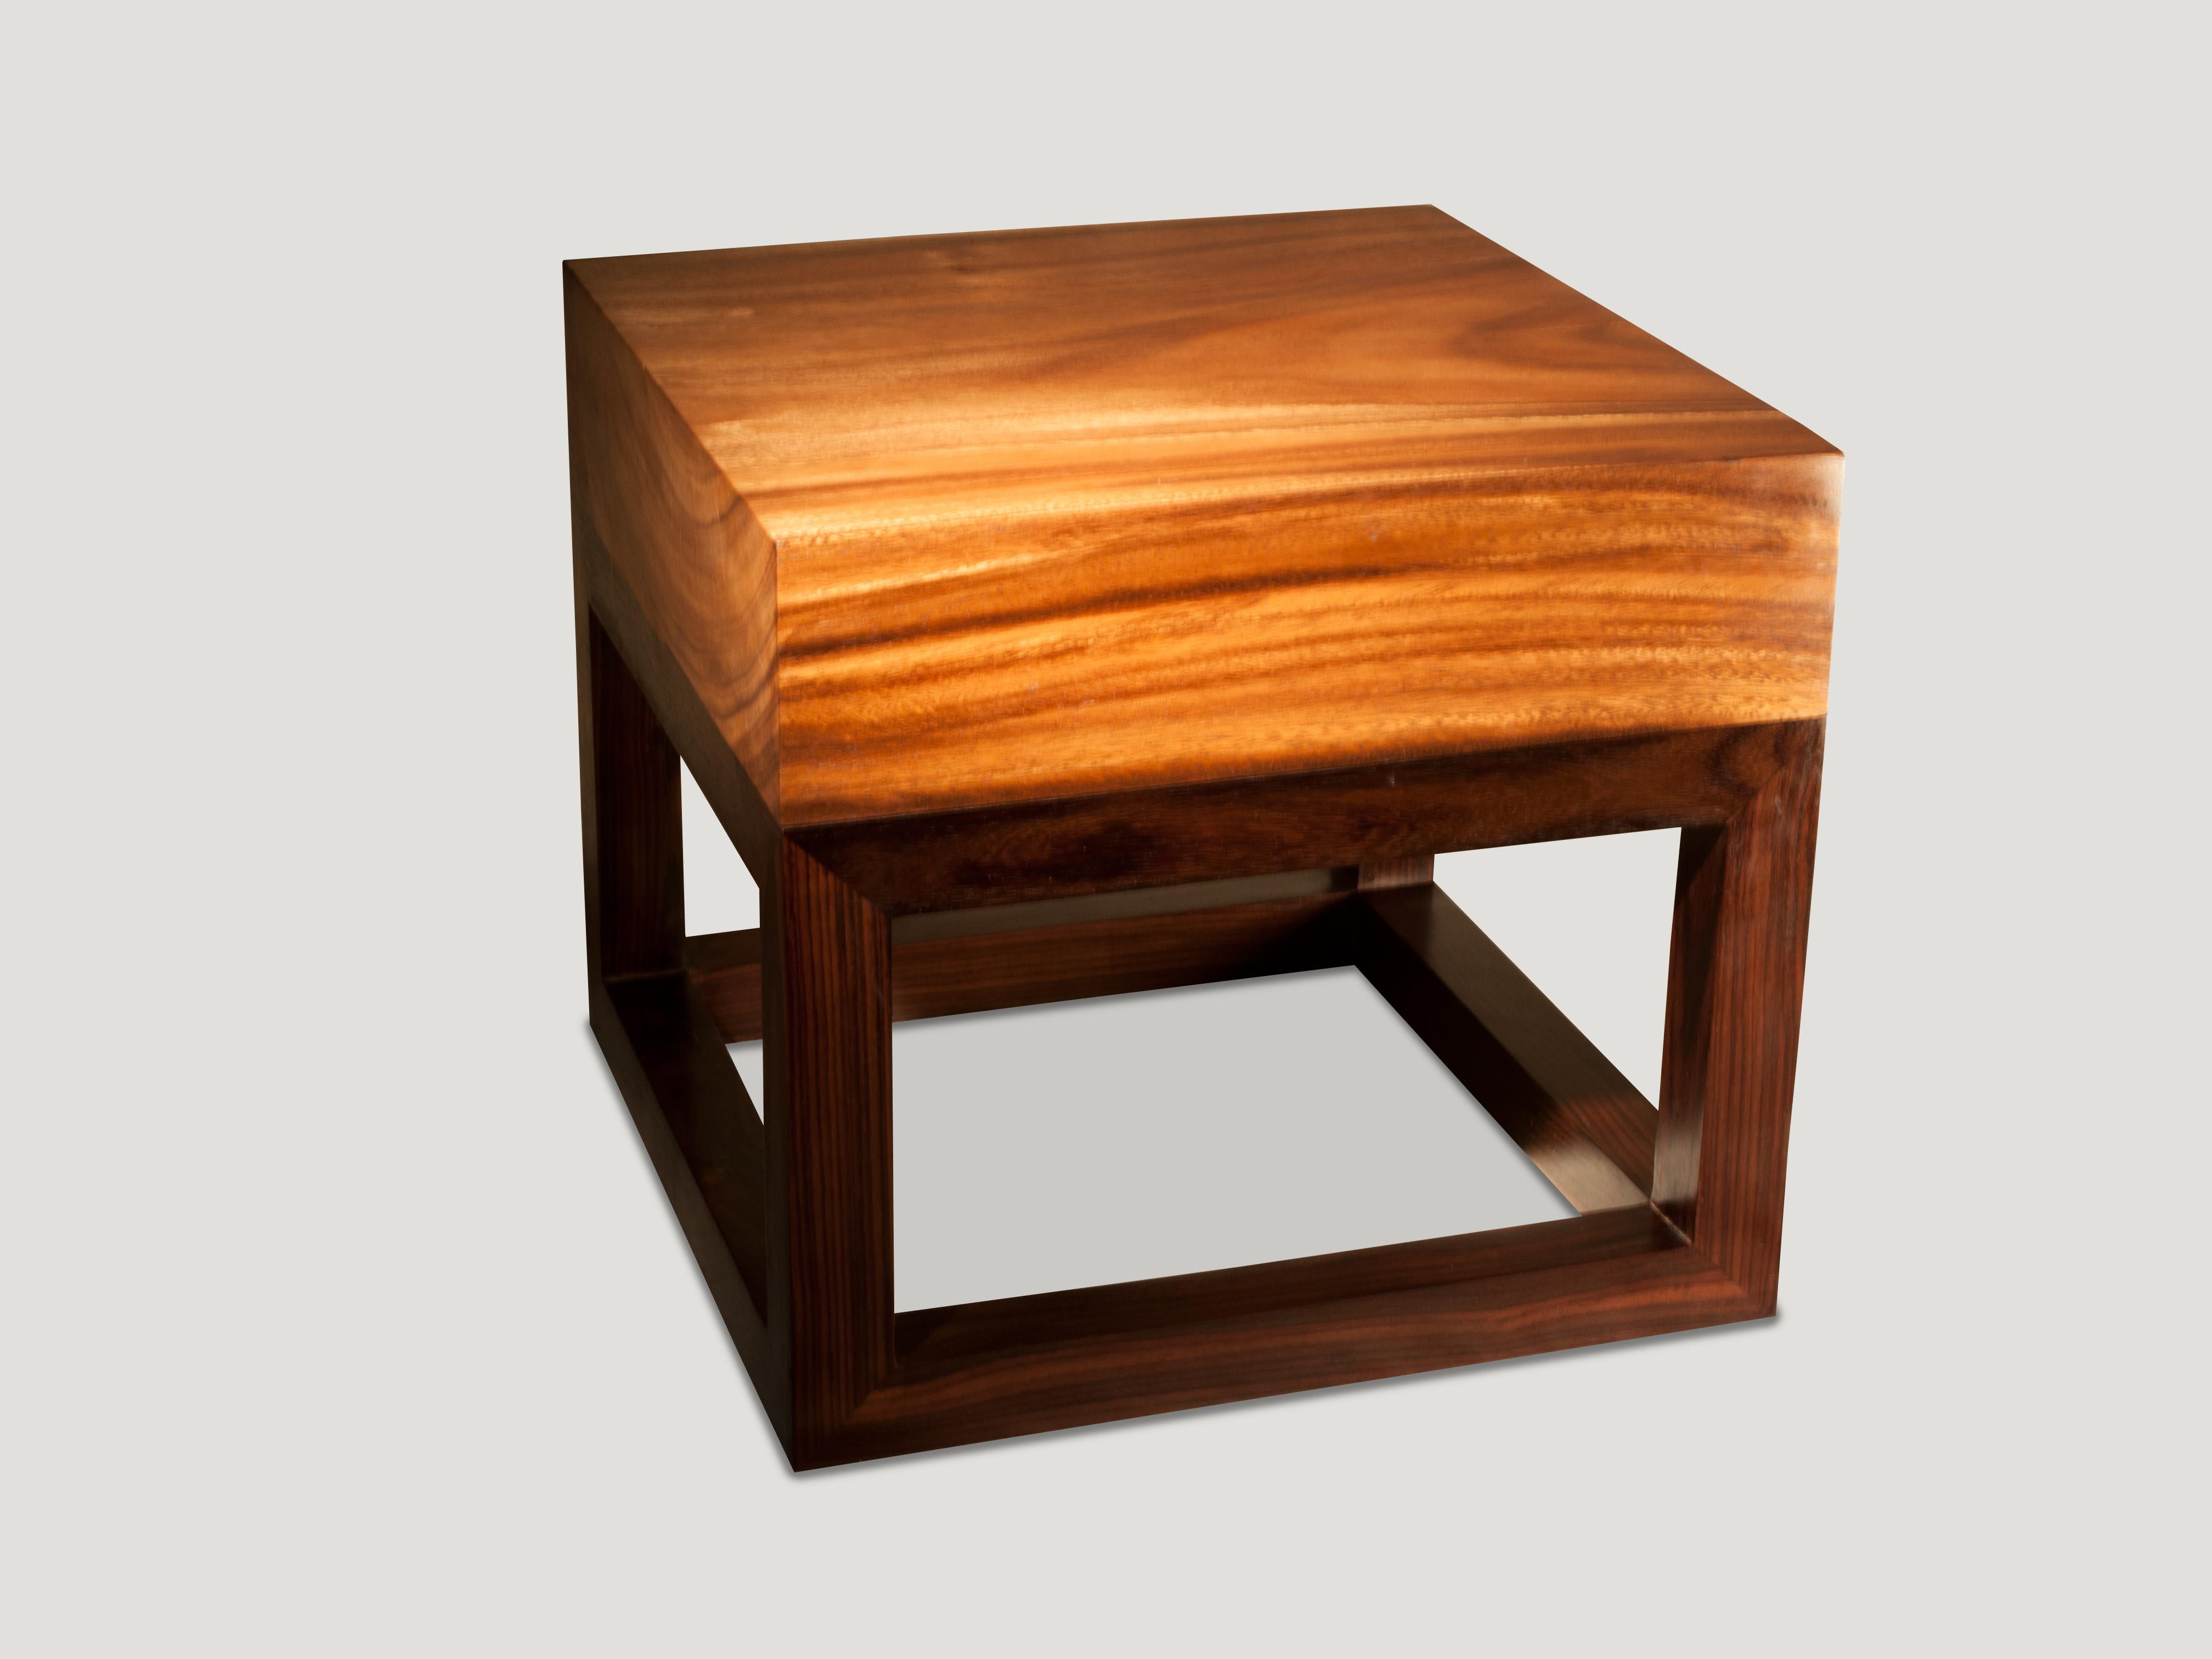 Andrianna Shamaris Minimalist Suar Wood Side Table In Excellent Condition For Sale In New York, NY